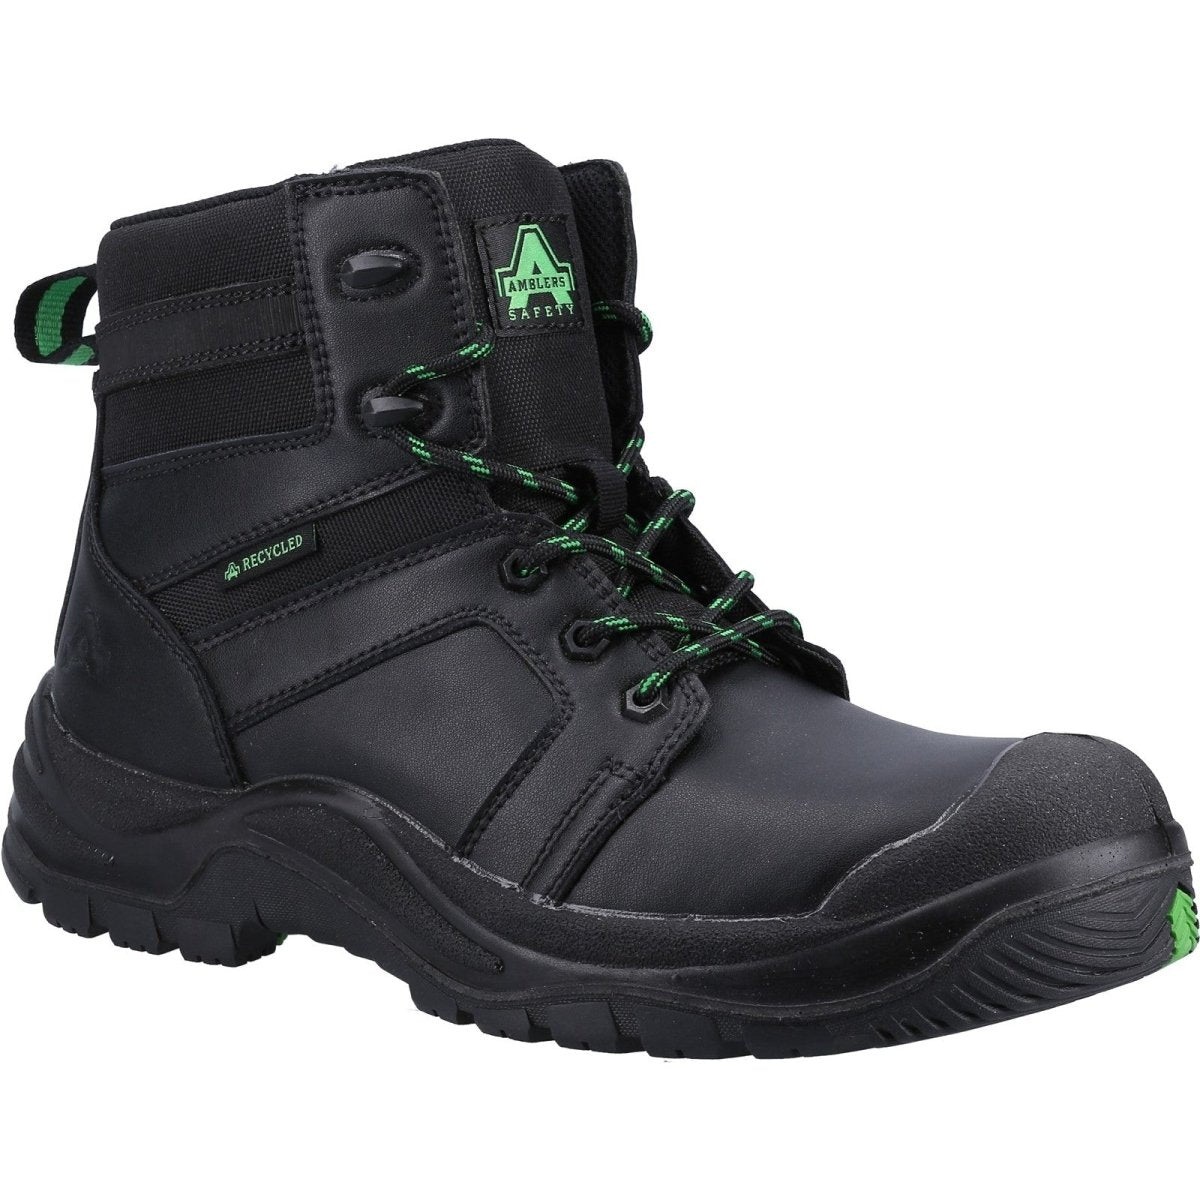 Amblers Safety 502 Safety Boots - Shoe Store Direct